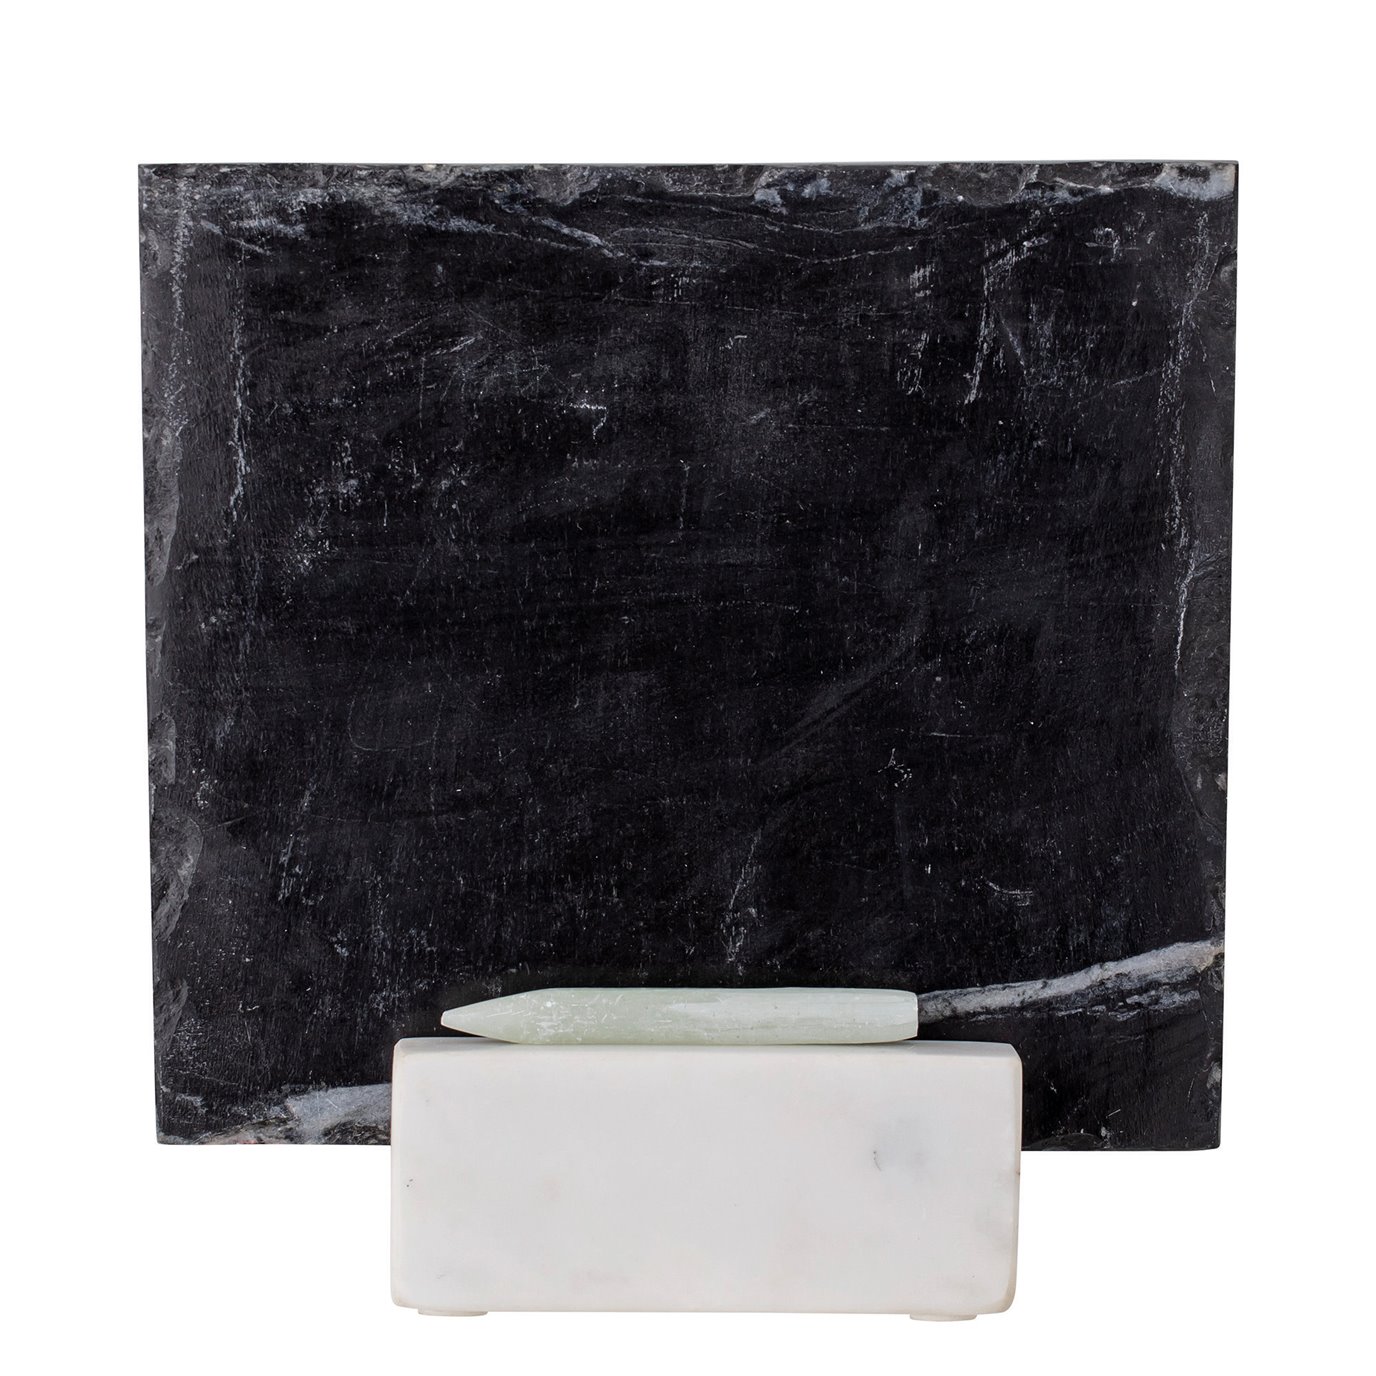 Slate Chalkboard with Marble Base and Pencil, Set of 2